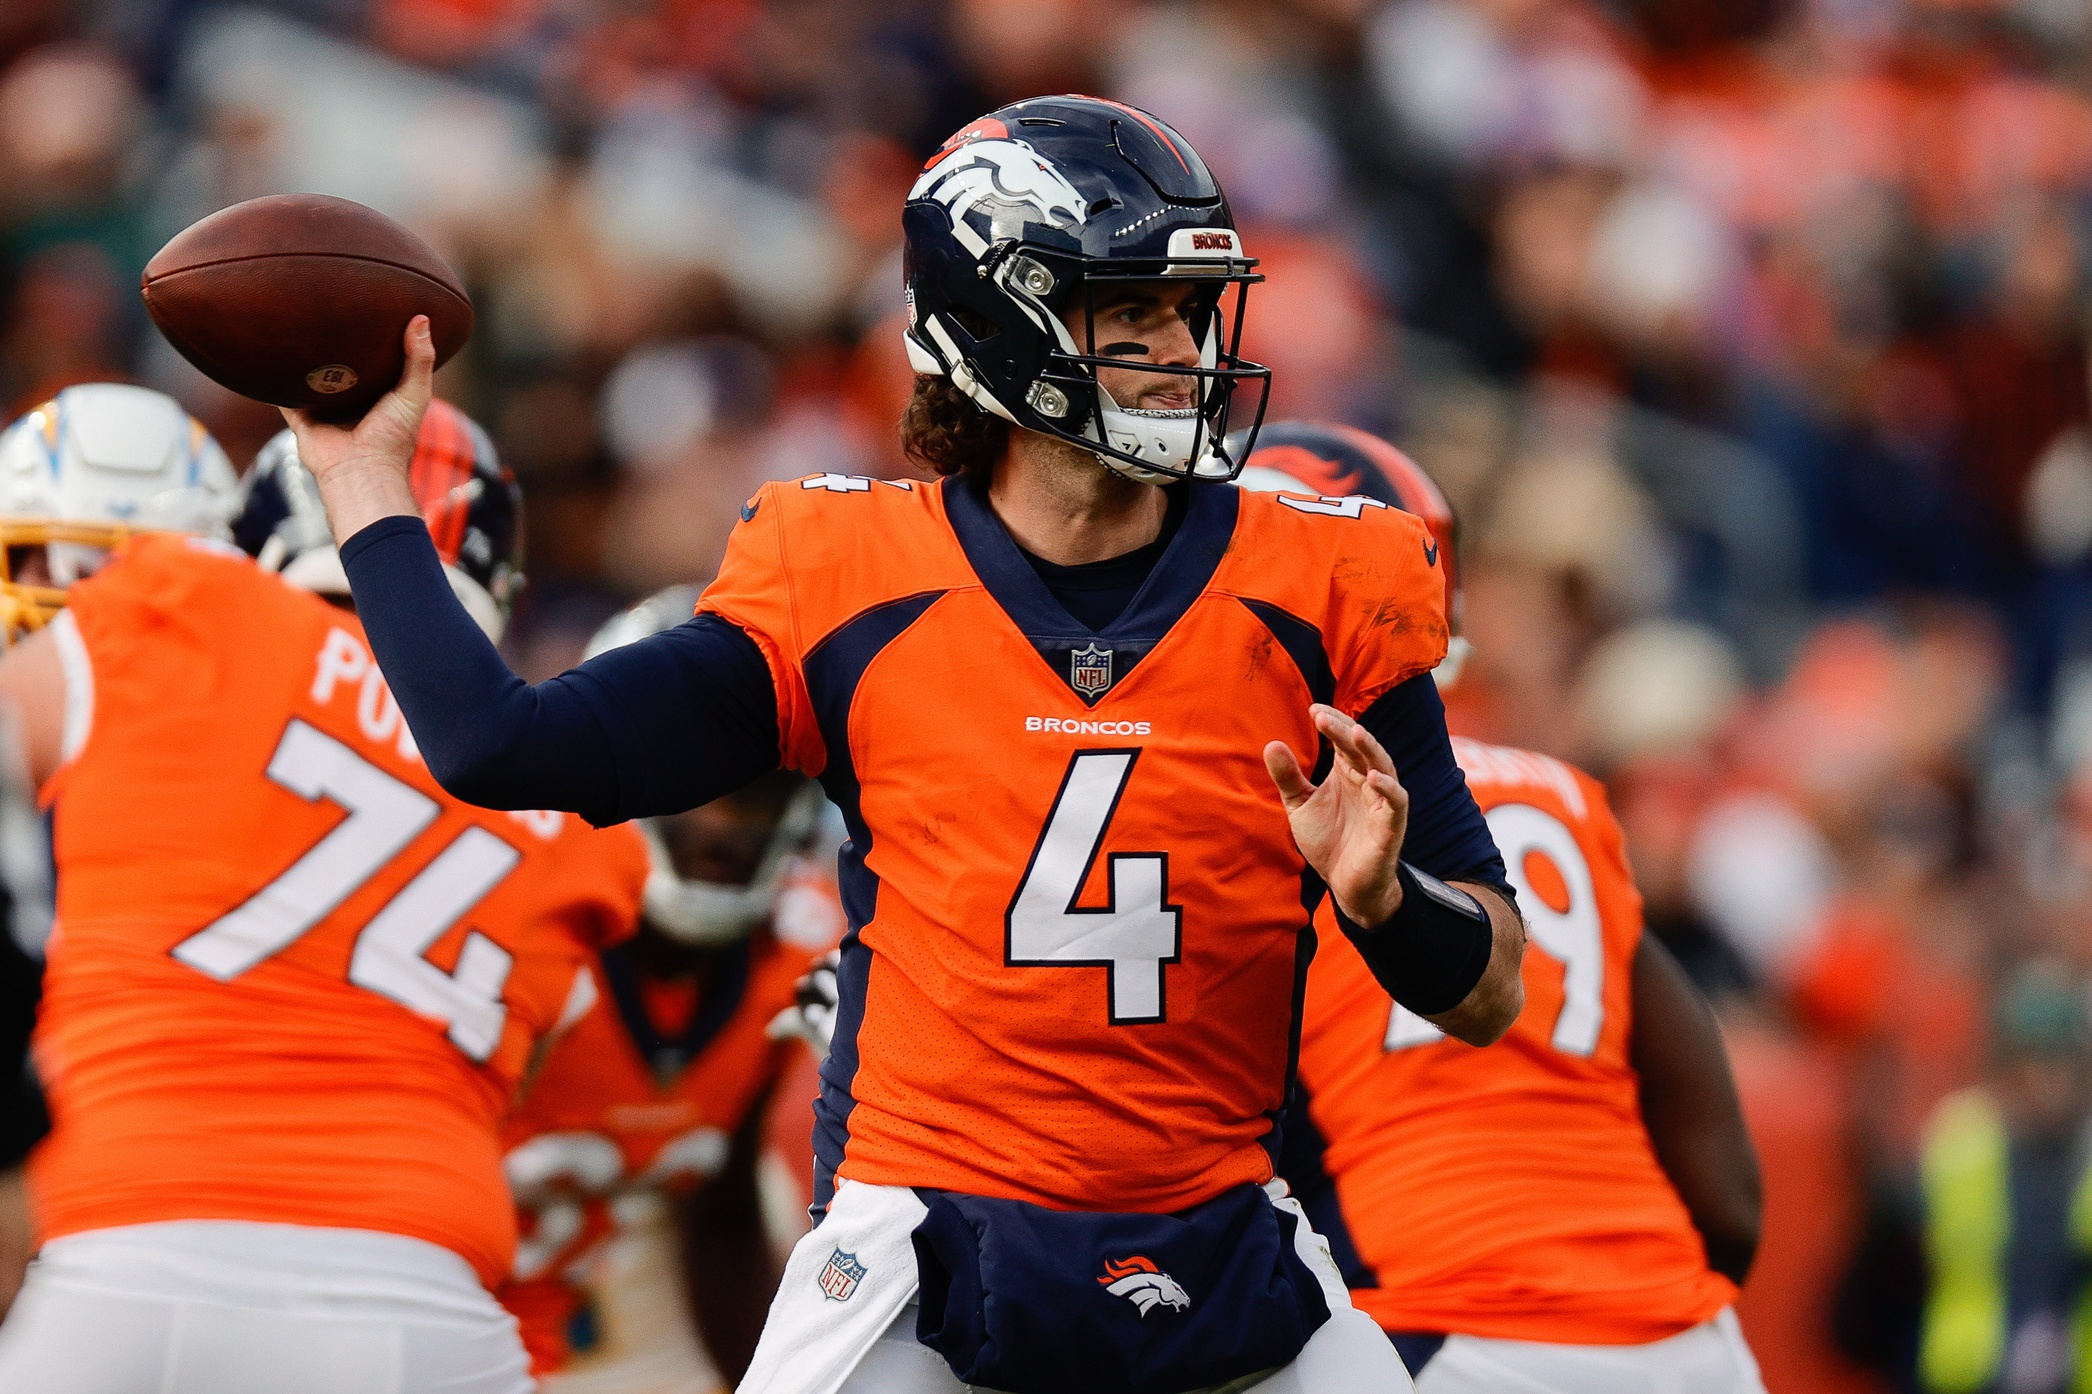 Denver Broncos quarterback Jarrett Stidham (4) attempts a pass in the first quarter against the Los Angeles Chargers at Empower Field at Mile High.